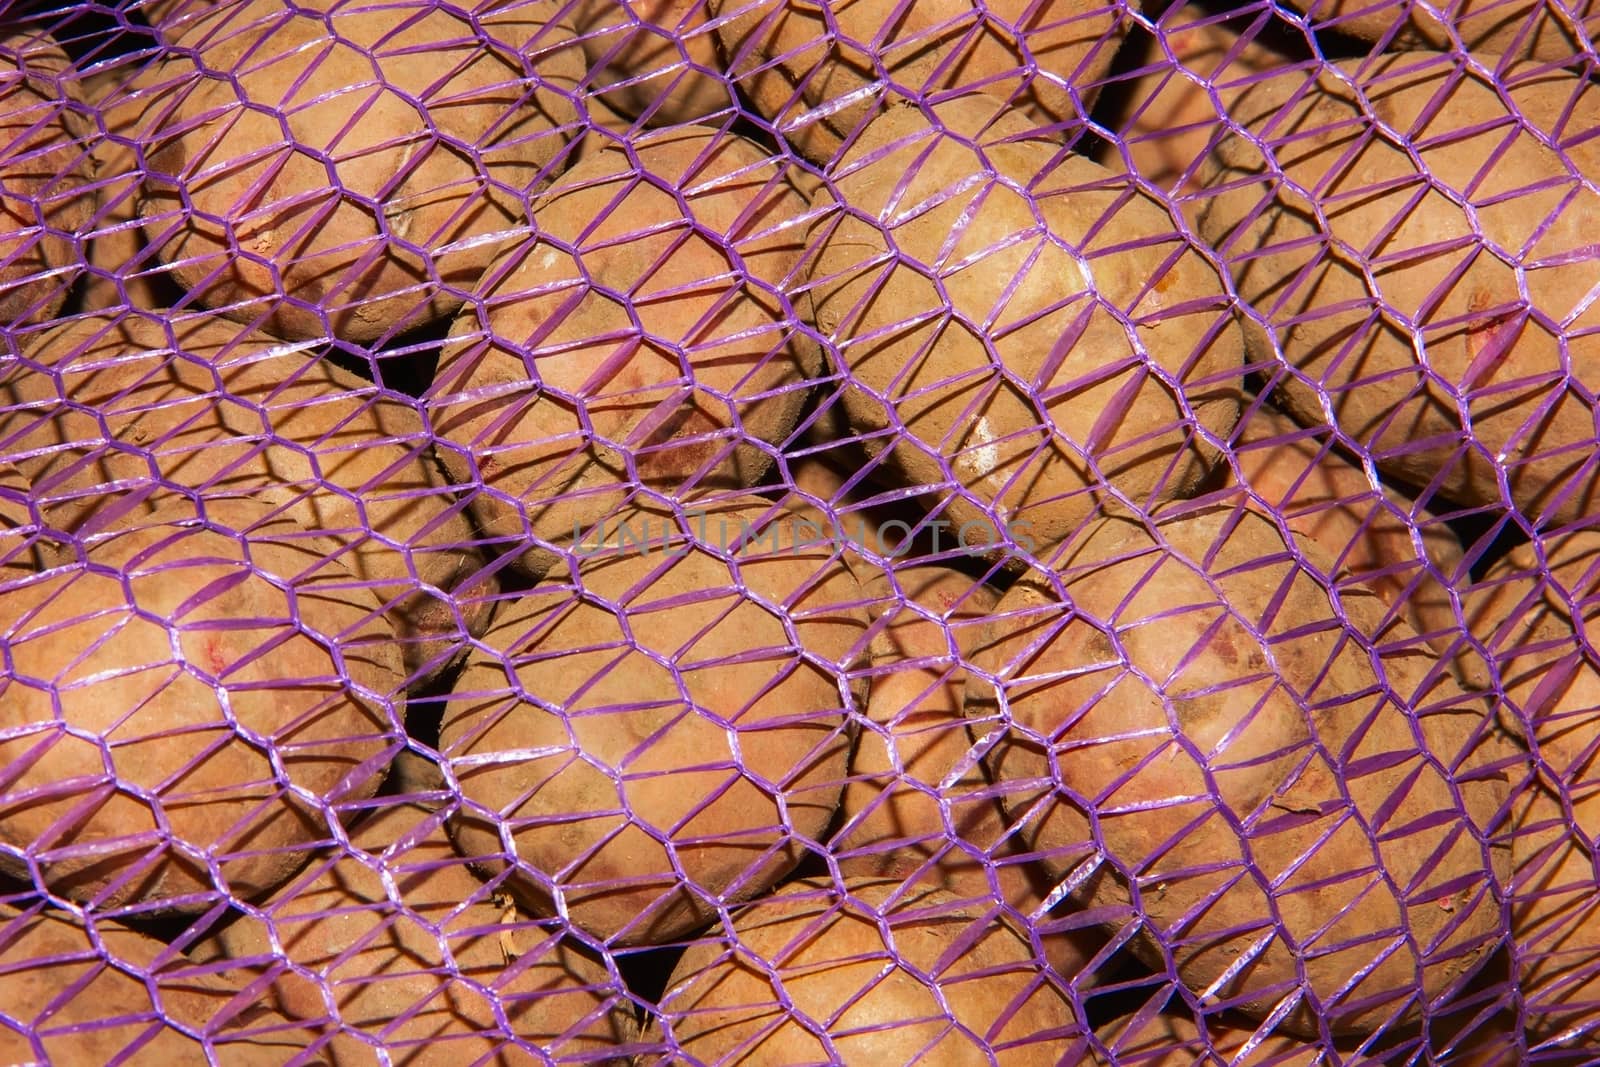 potatoes vegetables in a grid, mesh bags of potatoes in a truck, fresh raw potatoes